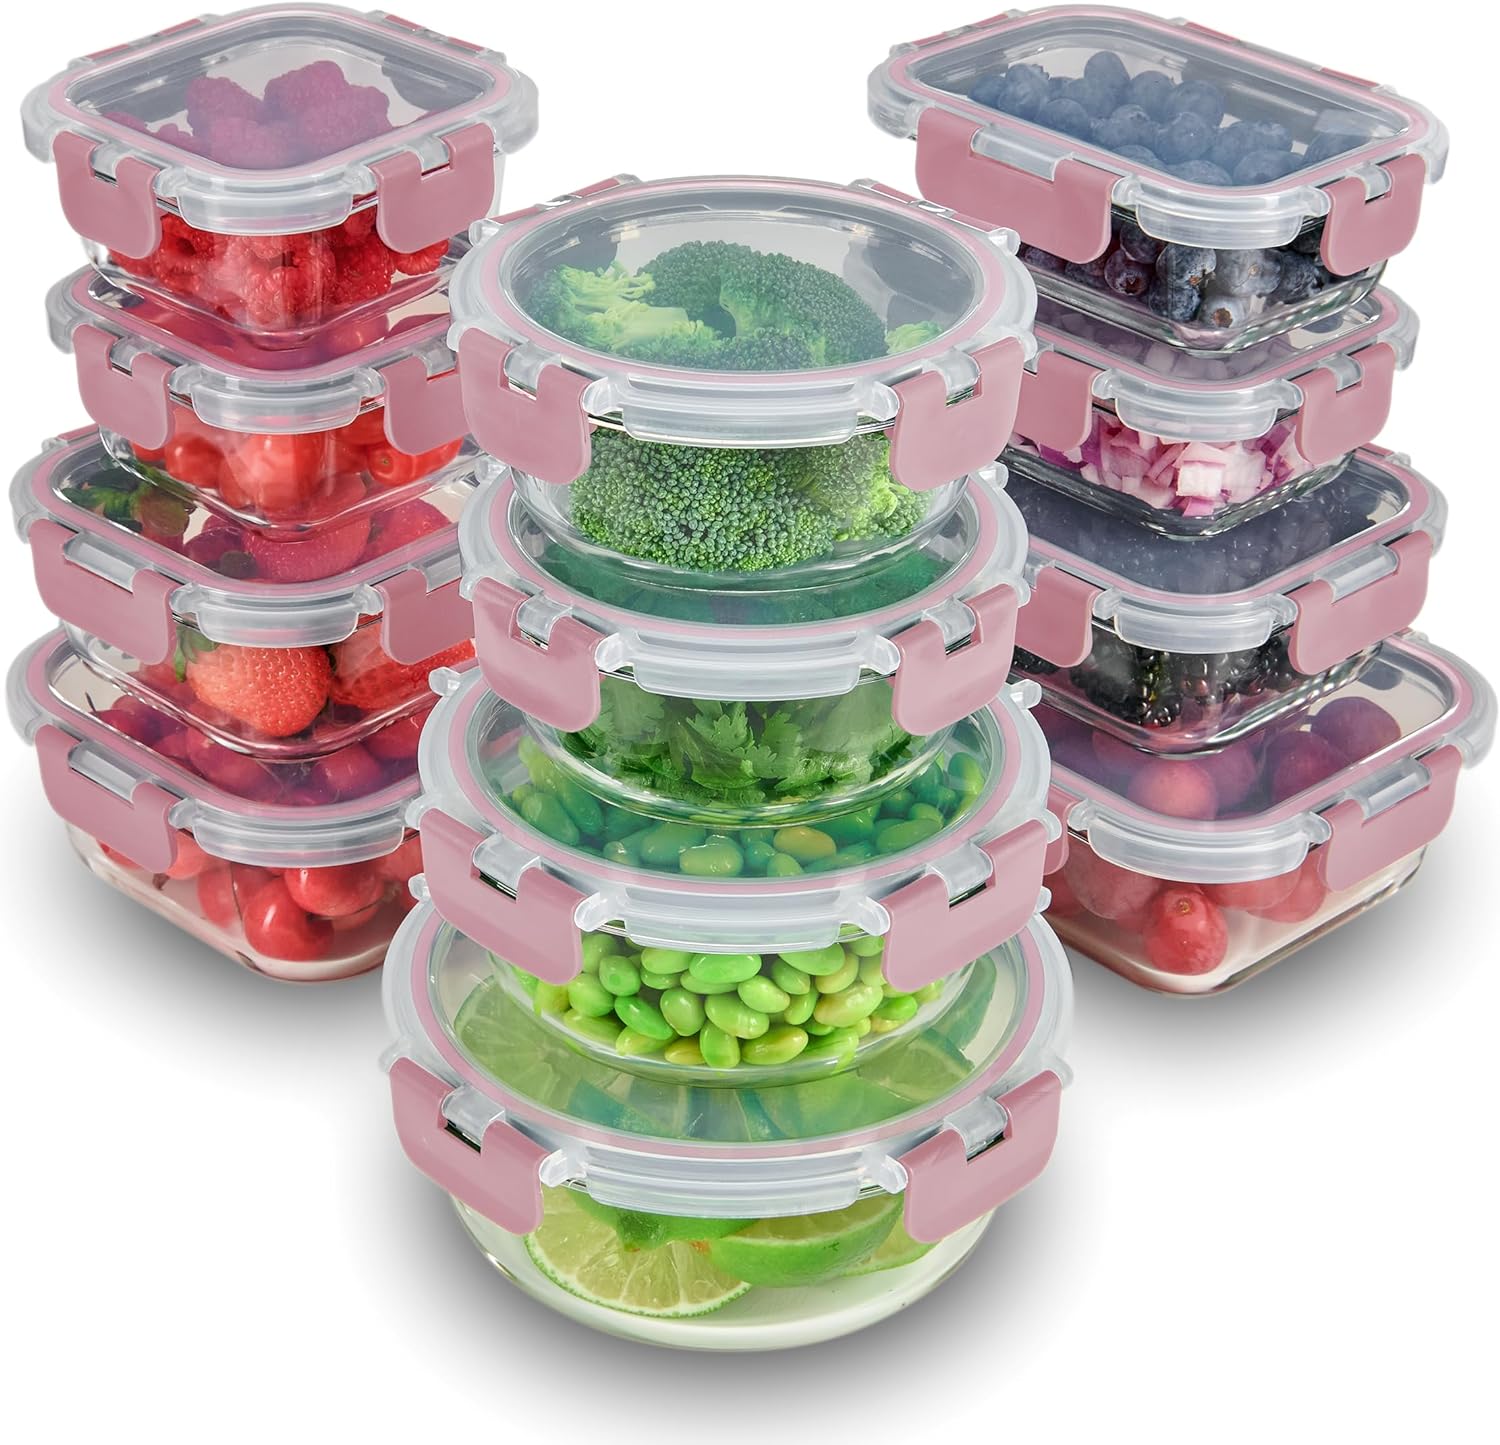 FineDine 24 Piece Glass Storage Containers with Lids - Leak Proof, Dishwasher Safe Glass Food Storage Containers for Meal Prep or Leftovers, Pink